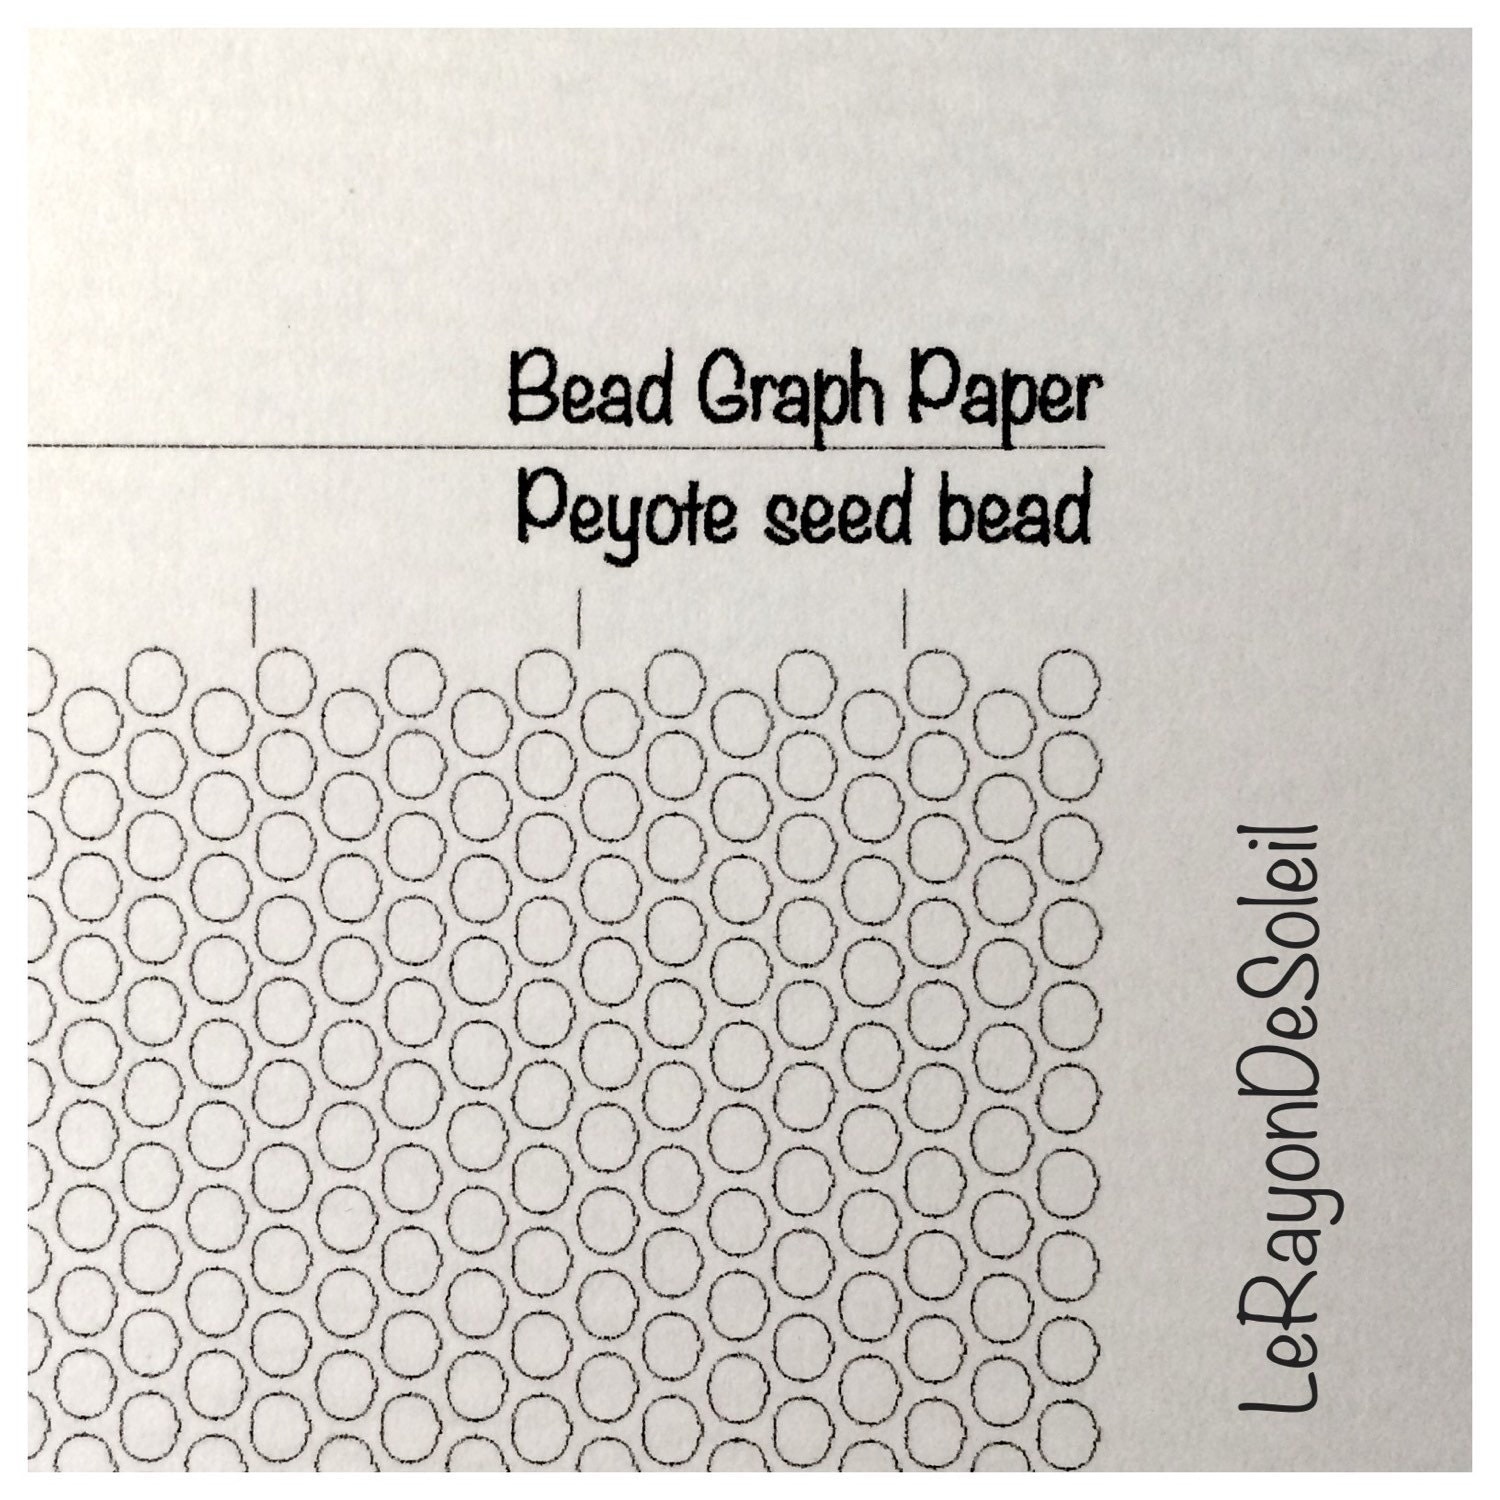 peyote seed bead graph paper peyote template for seed beads